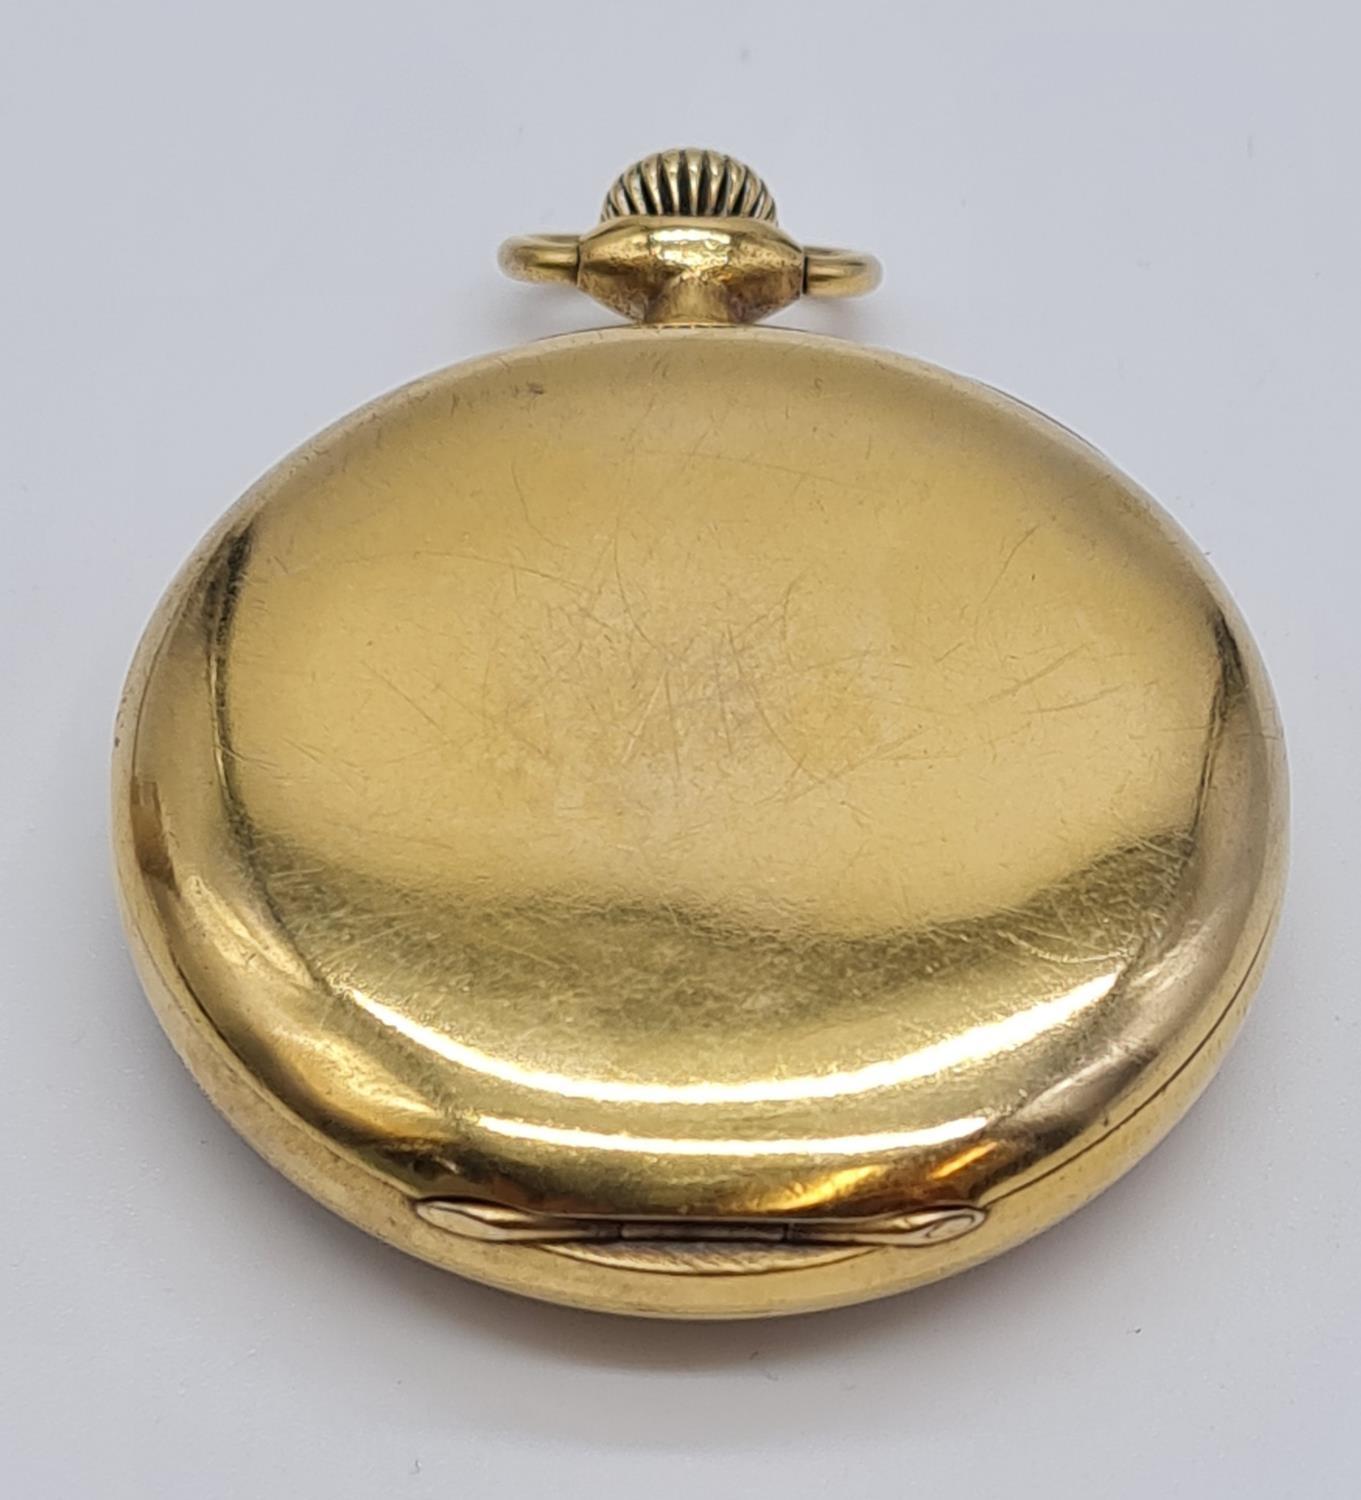 Omega Masonic Pocket Watch with rare Blue face, full working order - Image 2 of 7